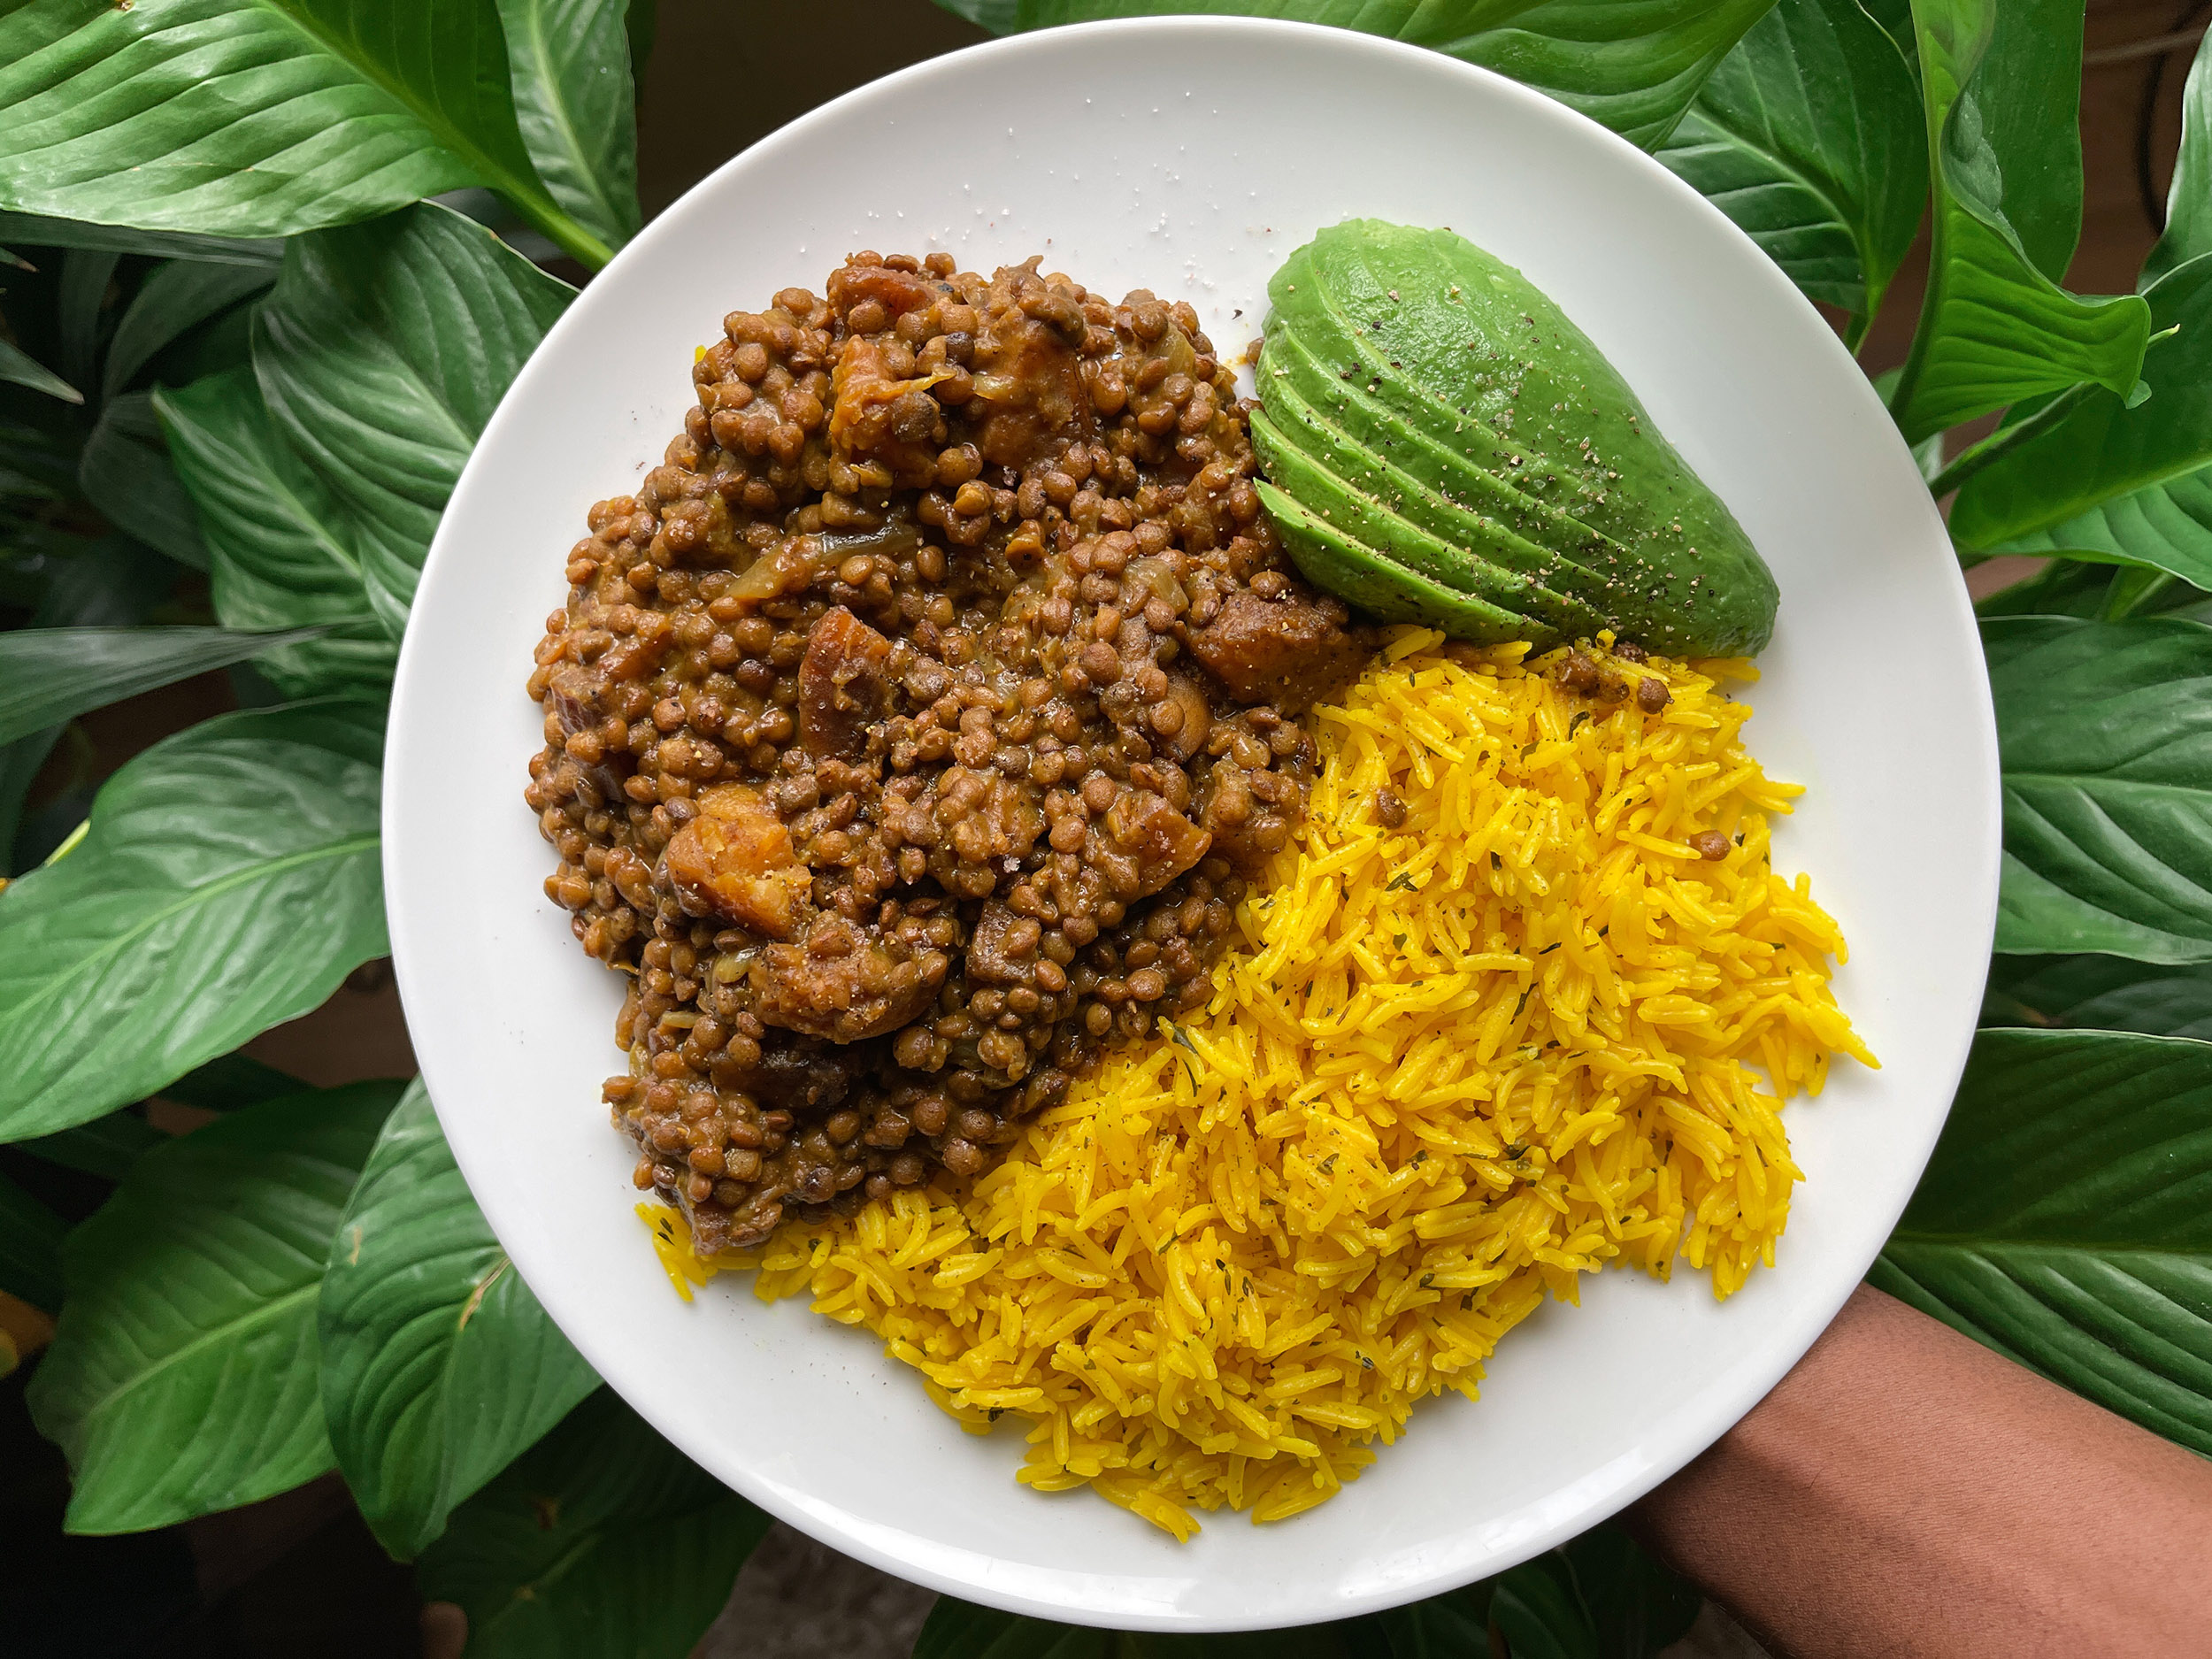 A beautifully presented plate of lentil curry with rice and slices of avocado against a background of lush green leaves.